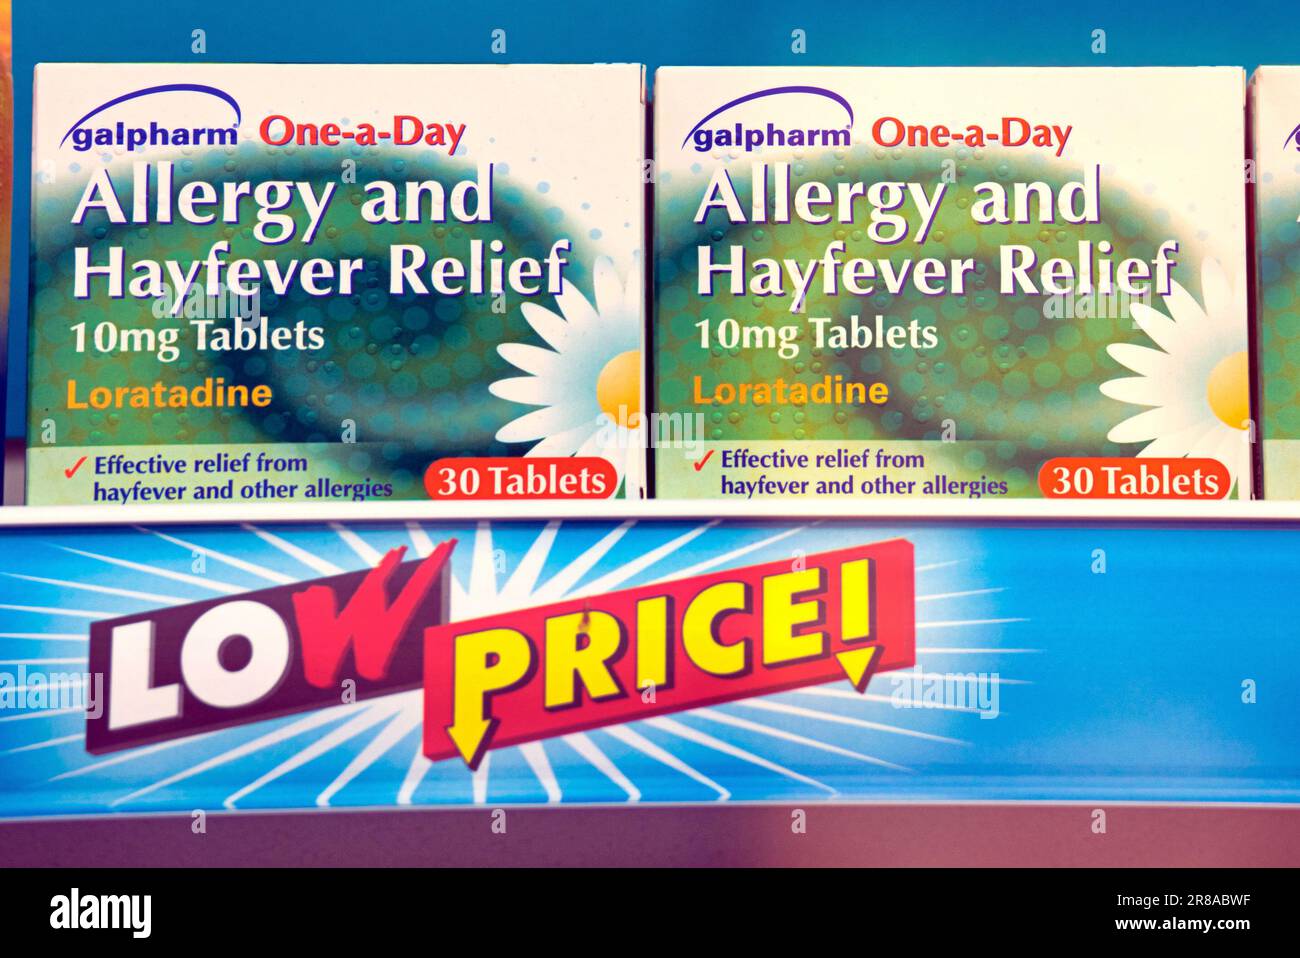 allergy and hat fever relief tablet's Stock Photo